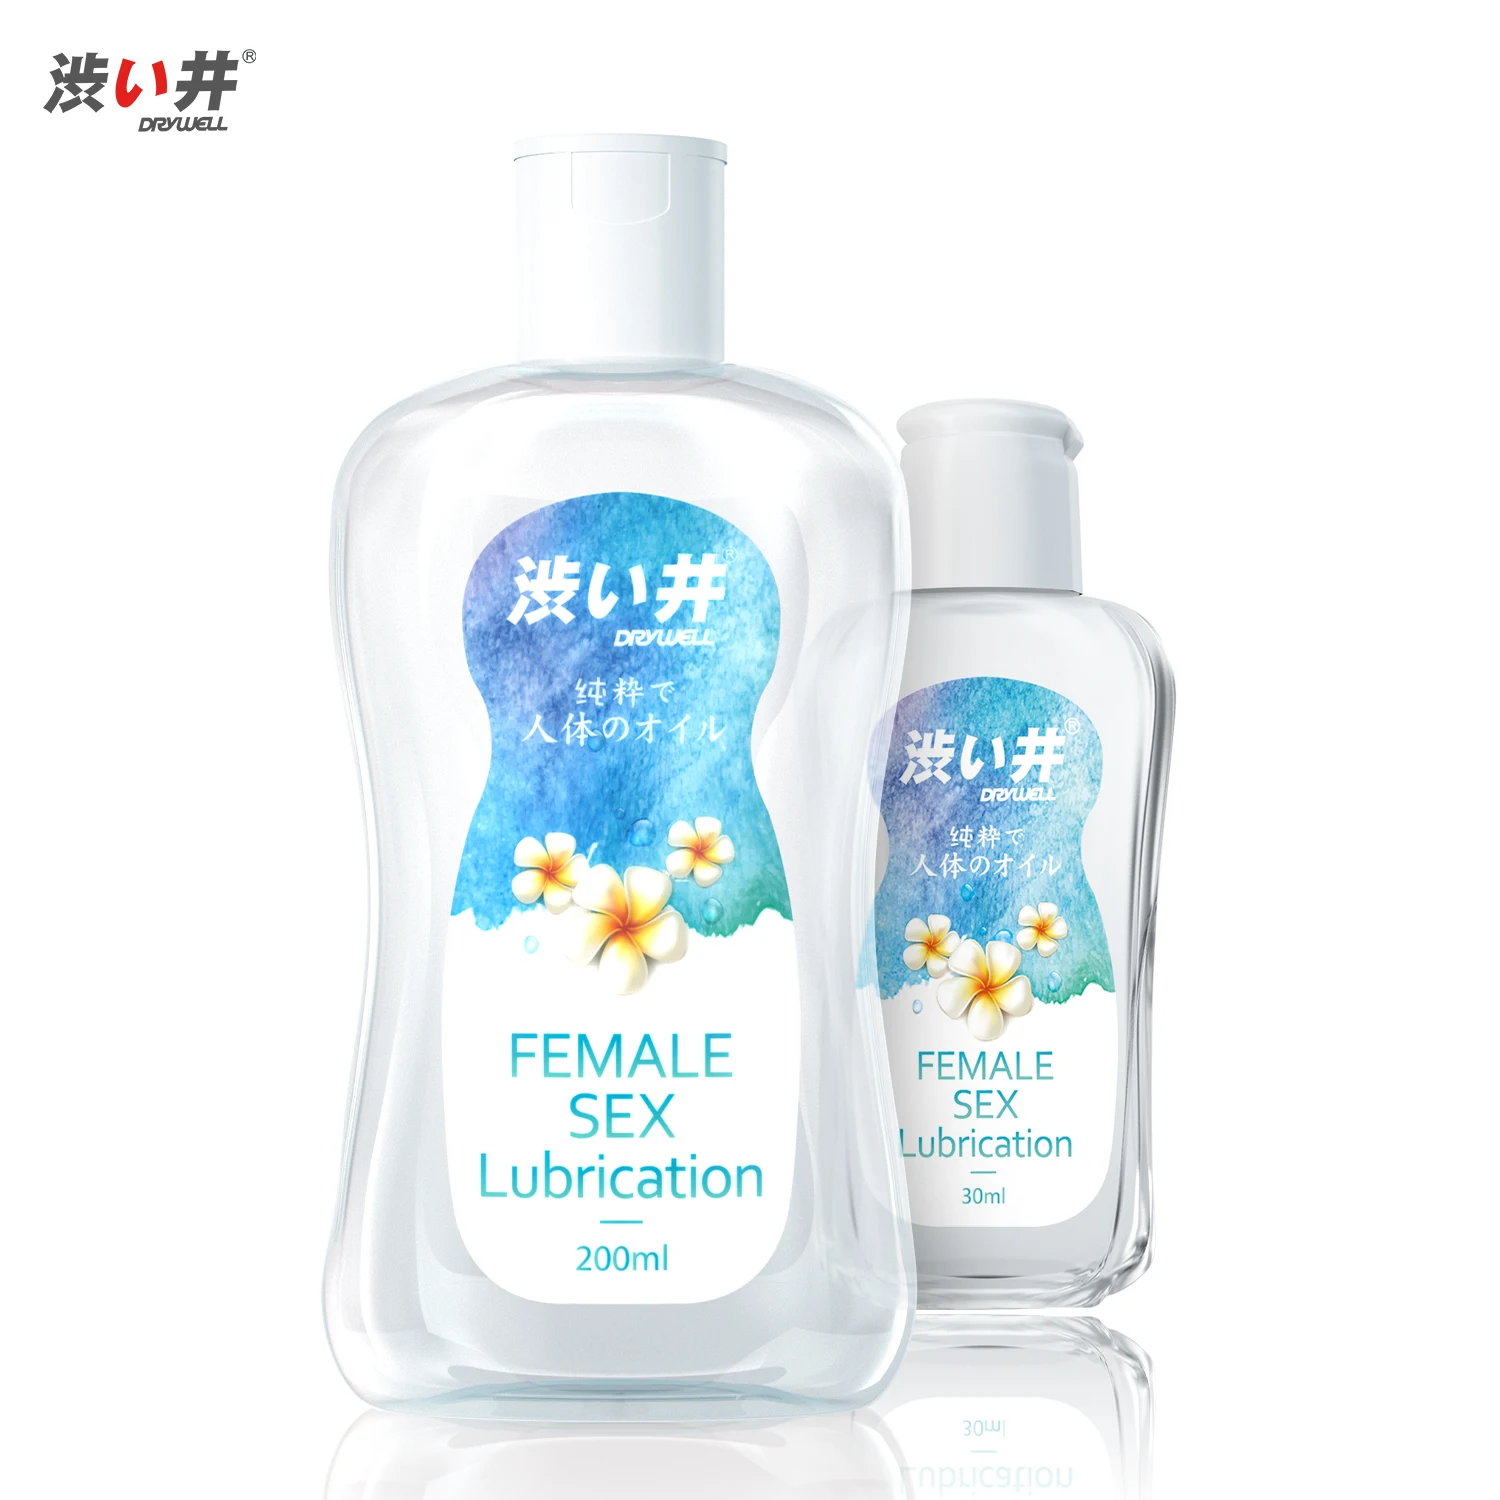 

DRY WELL 200ML Aloe Sex Lube Water-based Sexual Lubricant for Sex Silky-smooth Texture Latex Friendly Fragrance-free SM Sex Toy